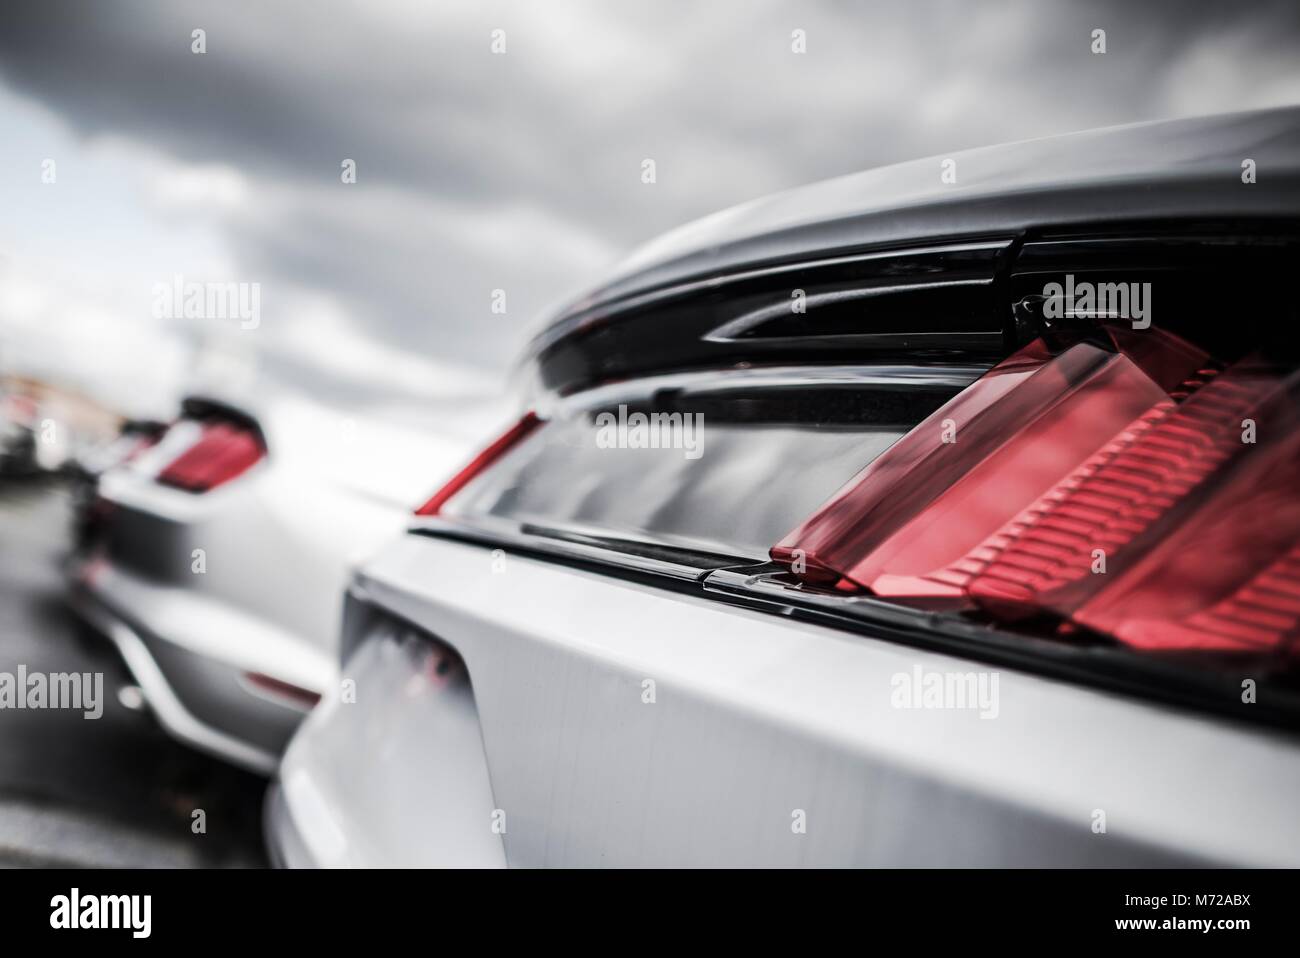 Certified Pre Owned Vehicles in Stock. Car Dealer Lot. Vehicle Rear Closeup. Stock Photo